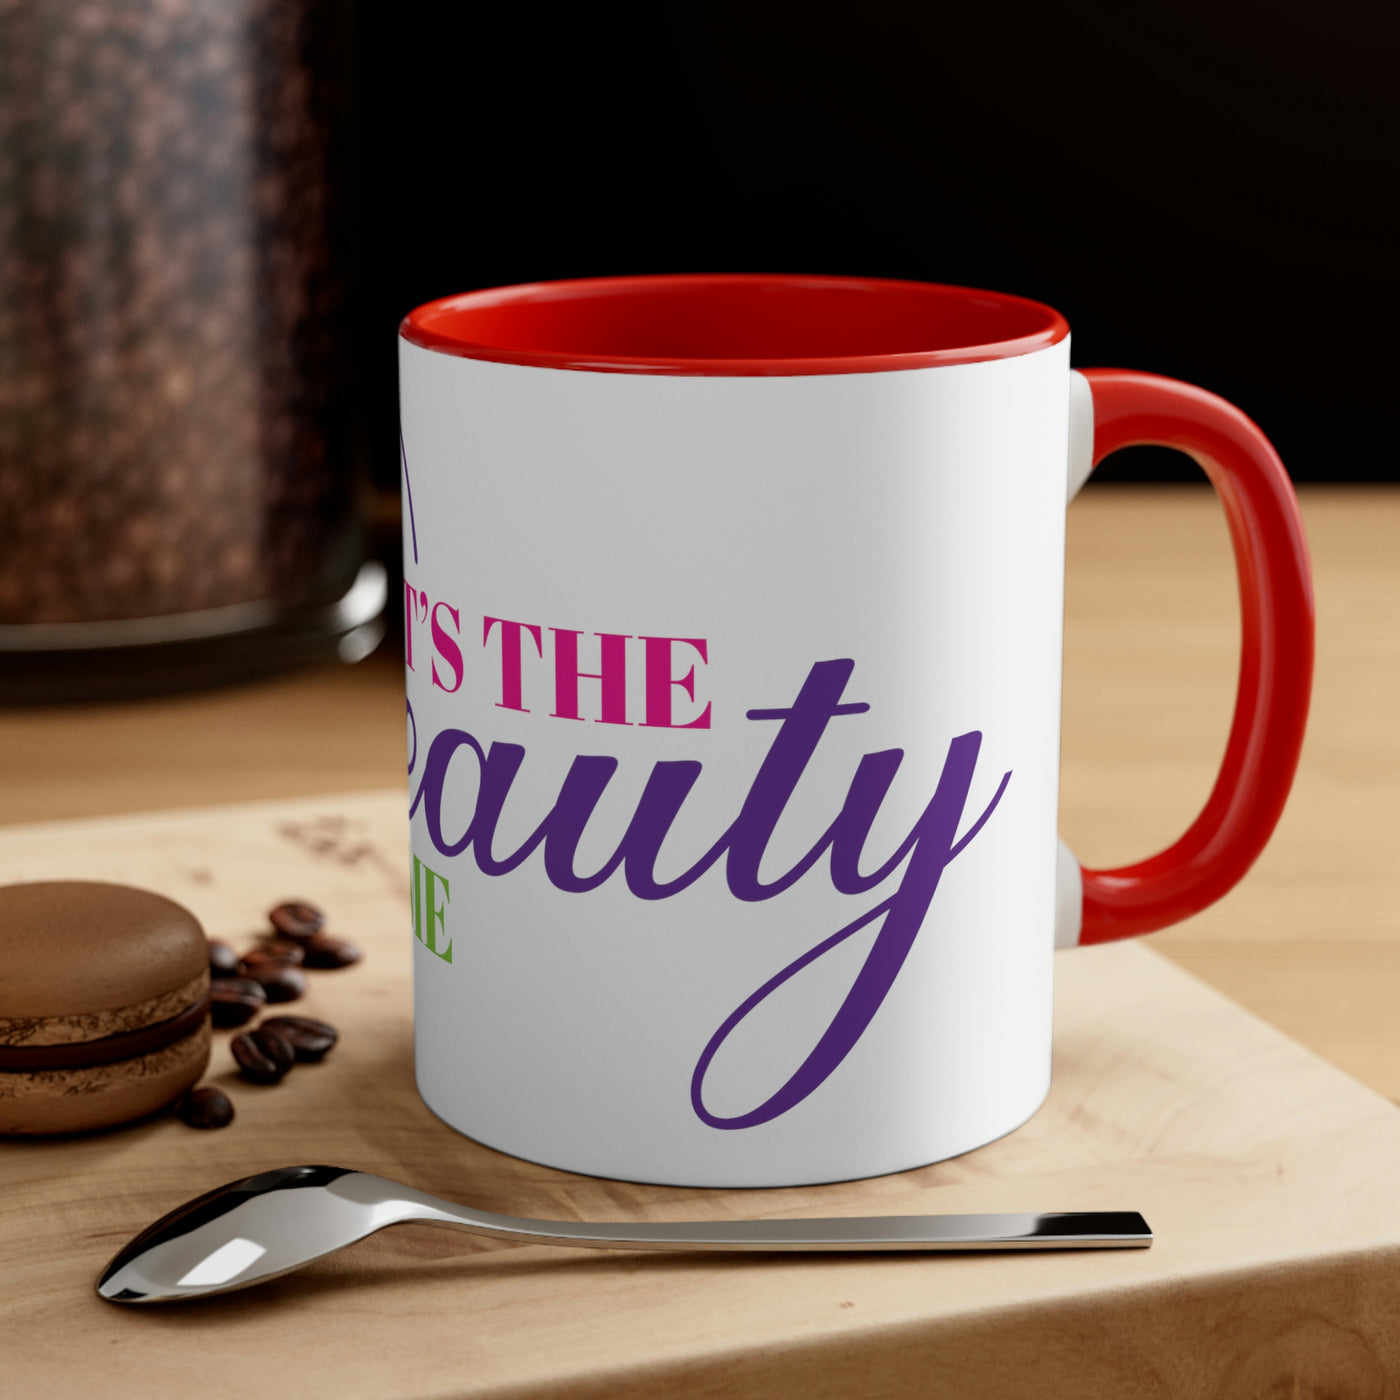 It's The Beauty In Me Accent Coffee Mug, 11oz